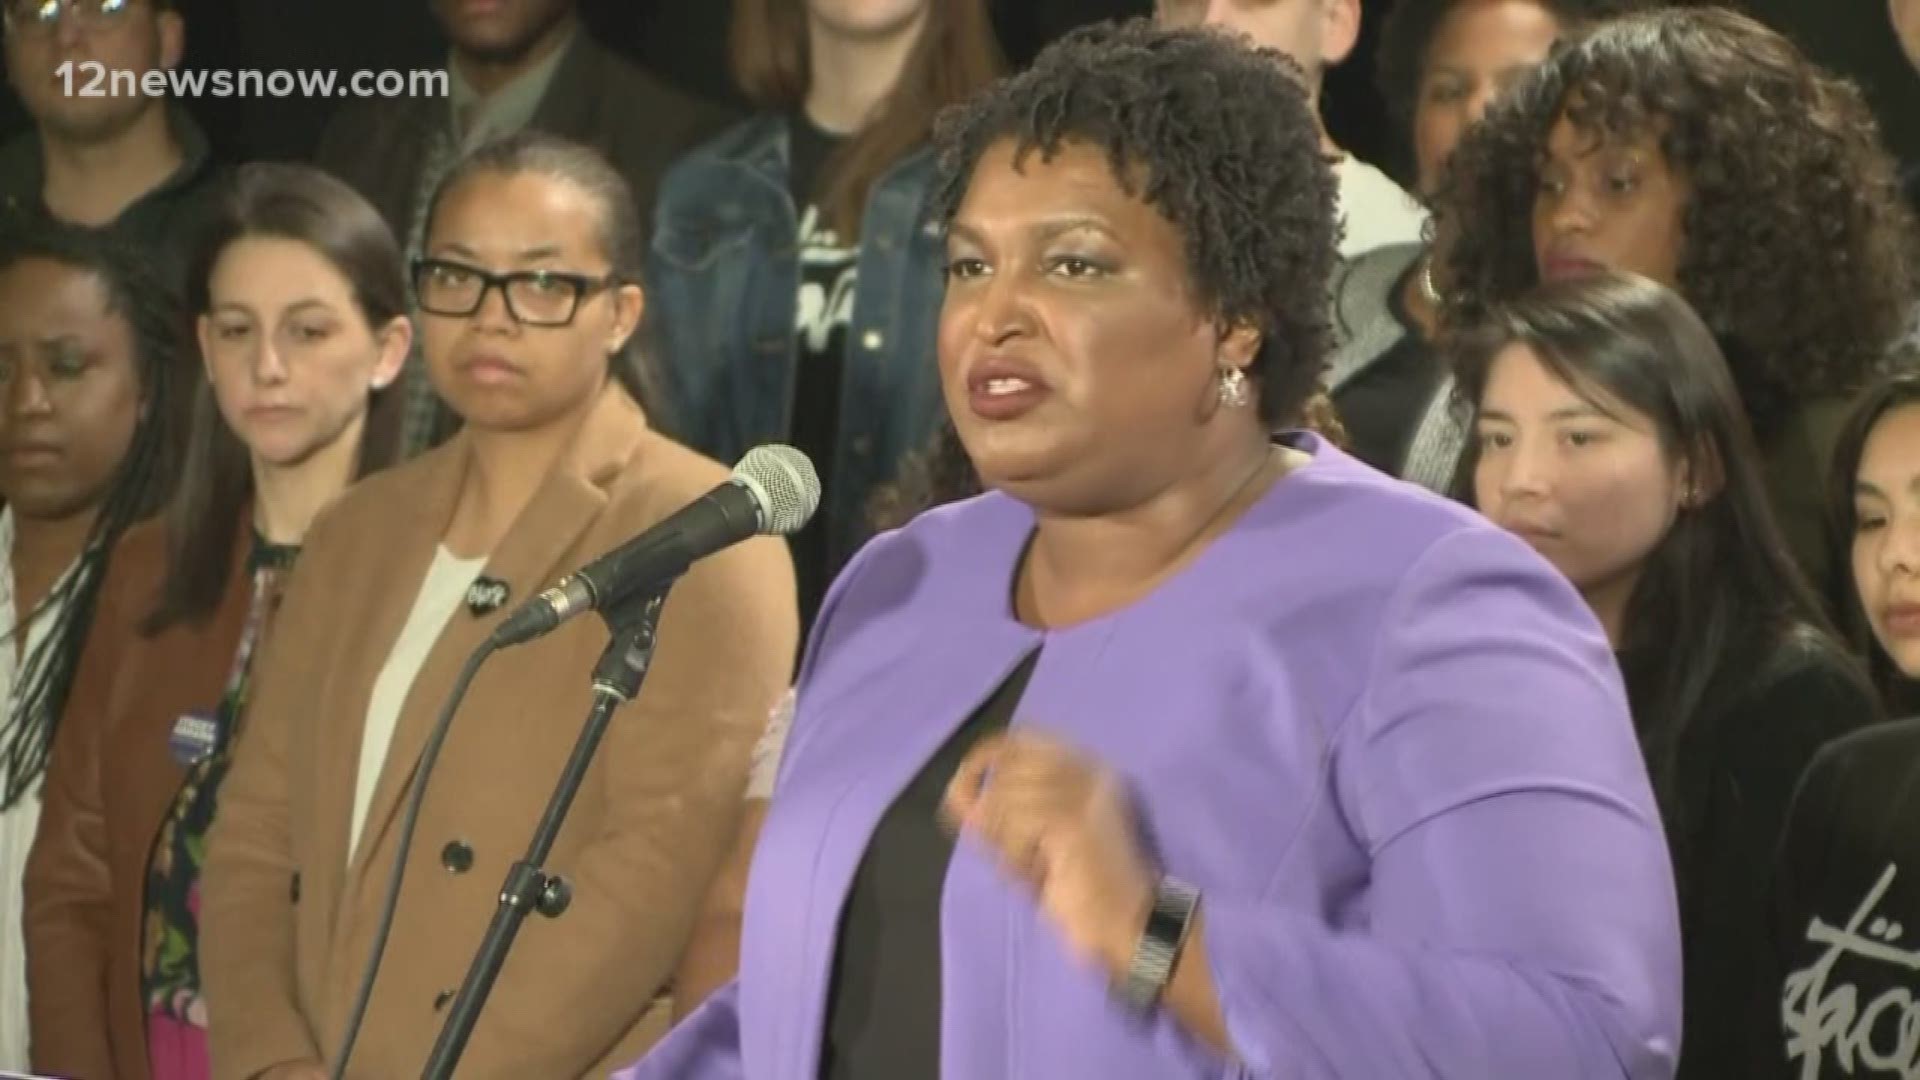 Democrat Stacey Abrams ends campaign for governor